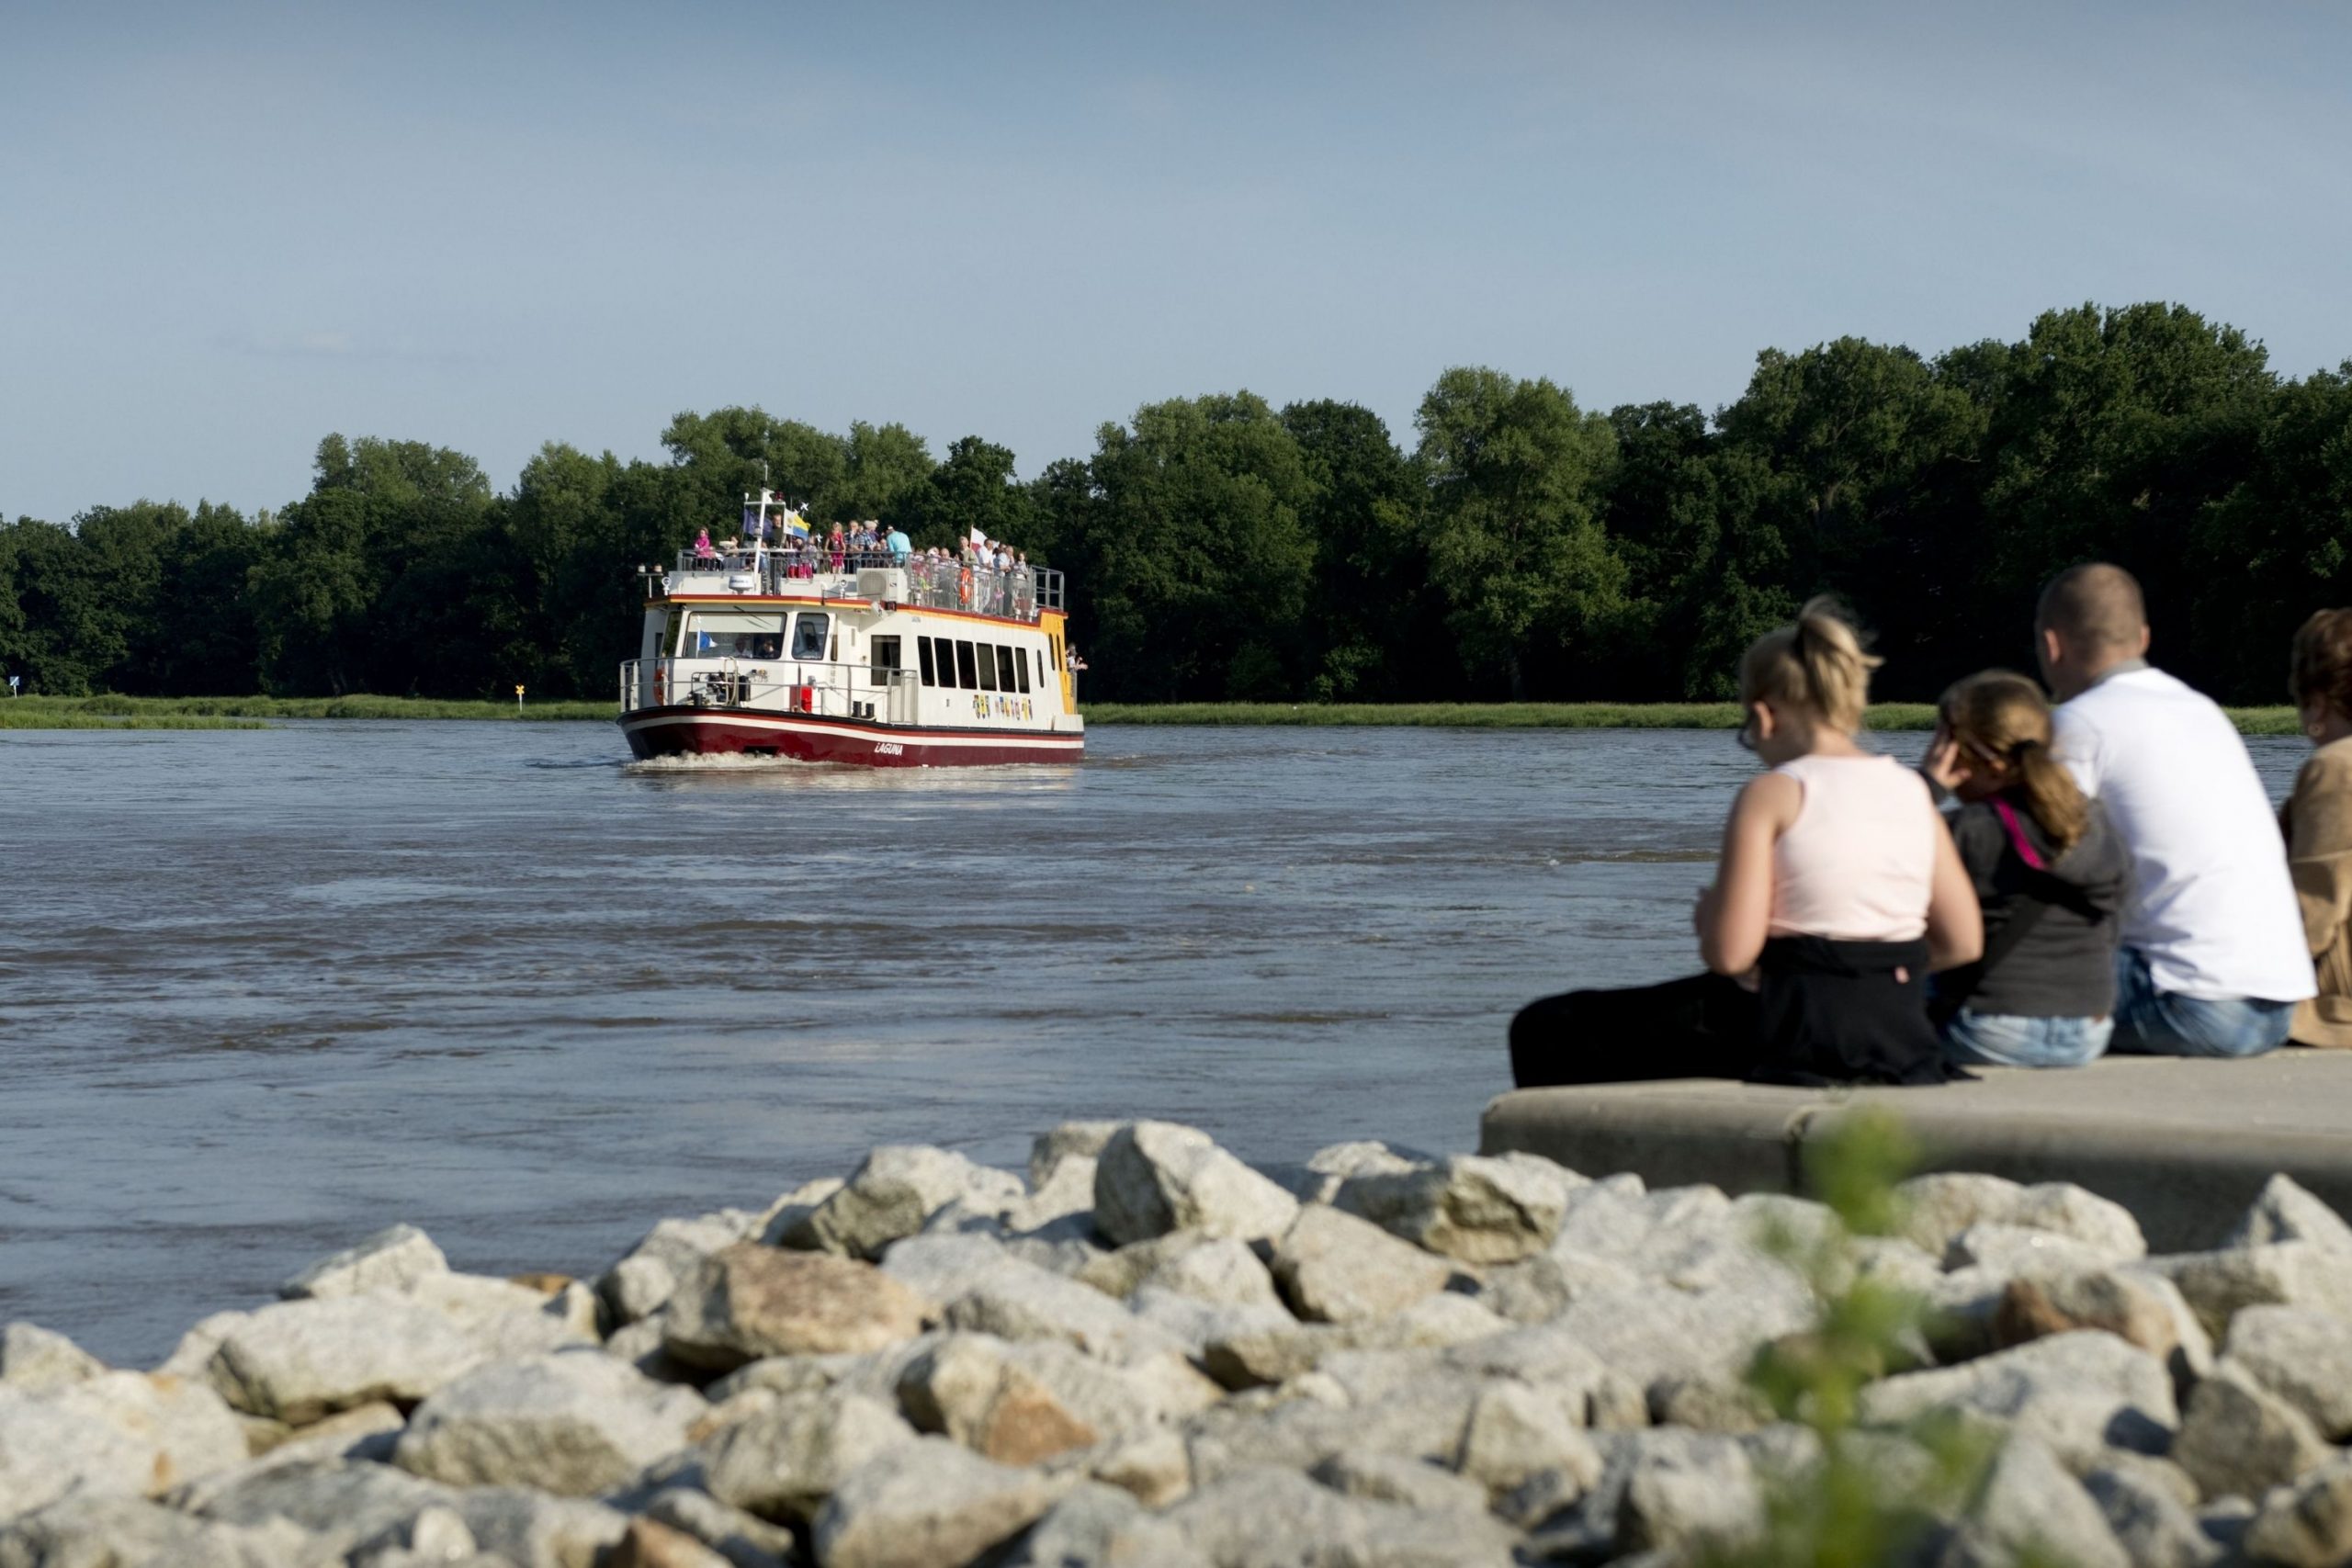 Cruises on the Oder River